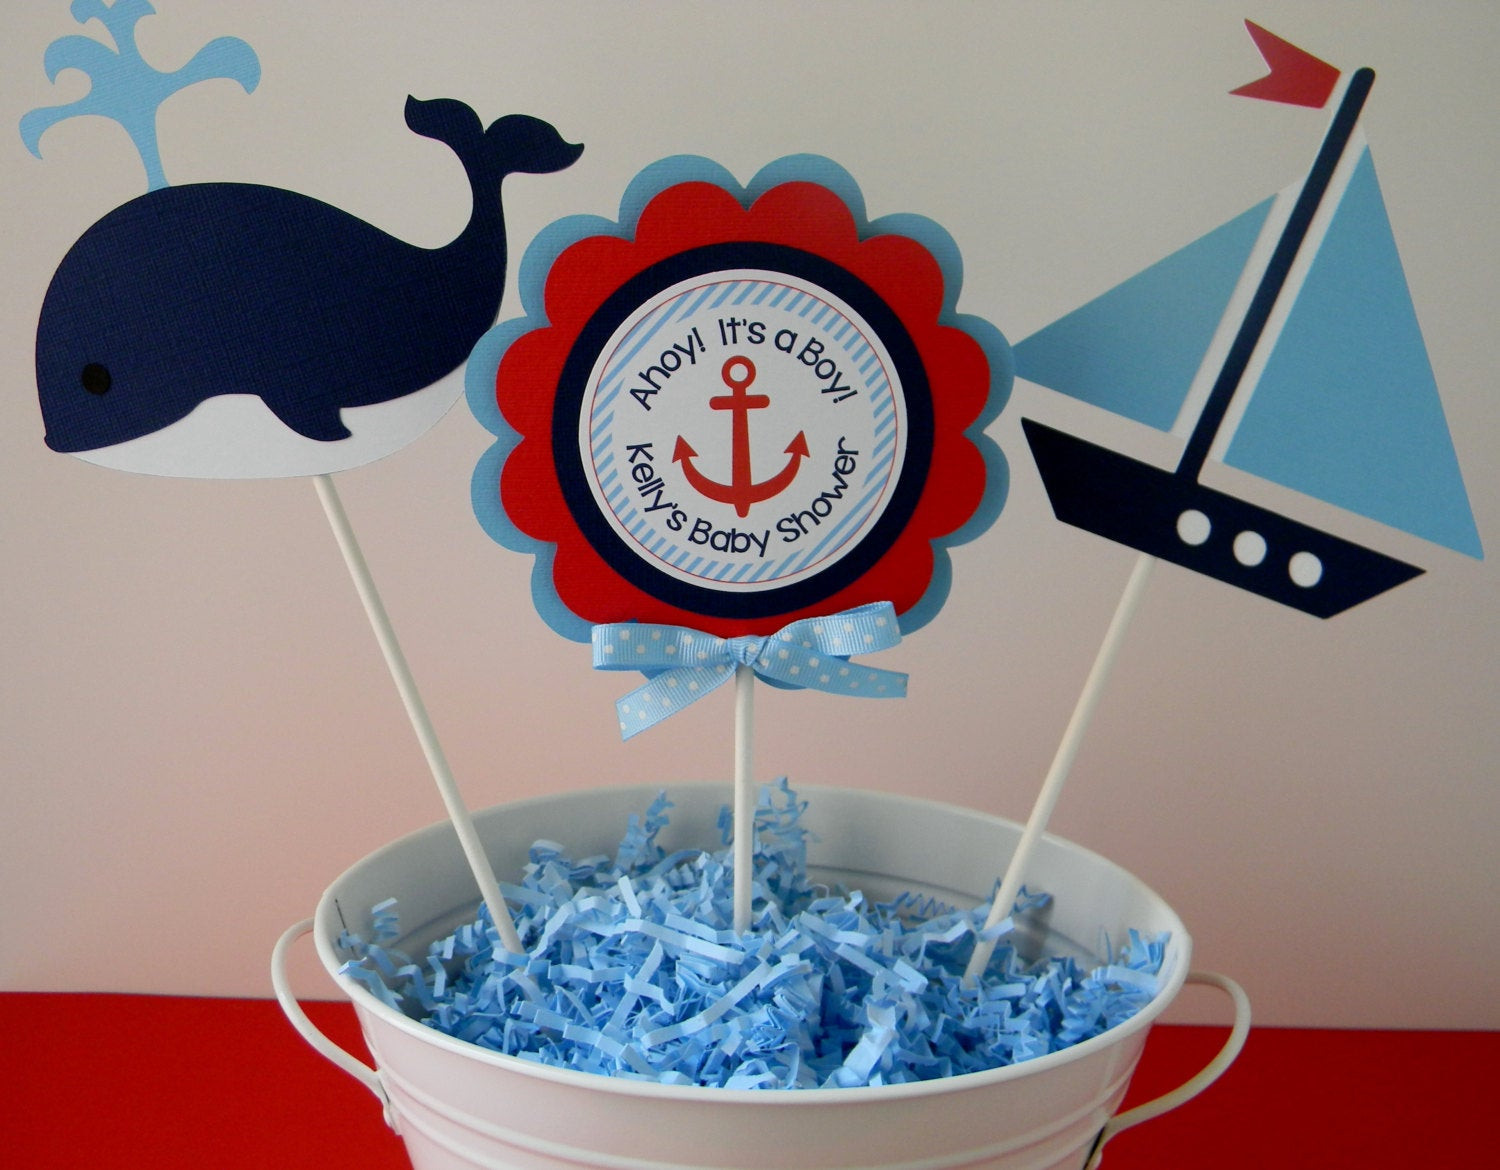 Nautical Baby Shower Decoration Ideas
 Nautical Baby Shower or Birthday Party Personalized